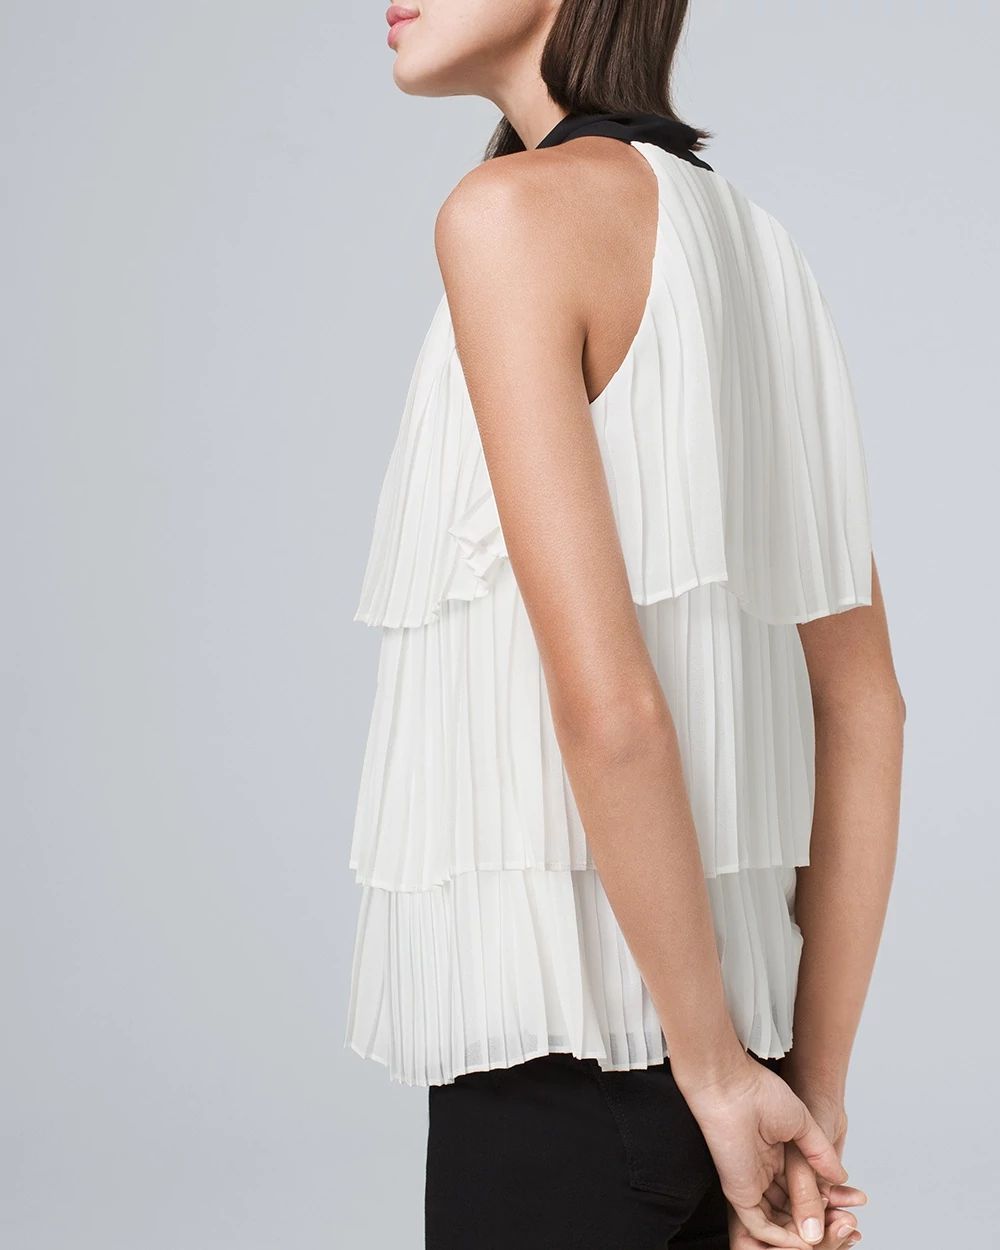 Bow-Neck Pleated Blouse click to view larger image.